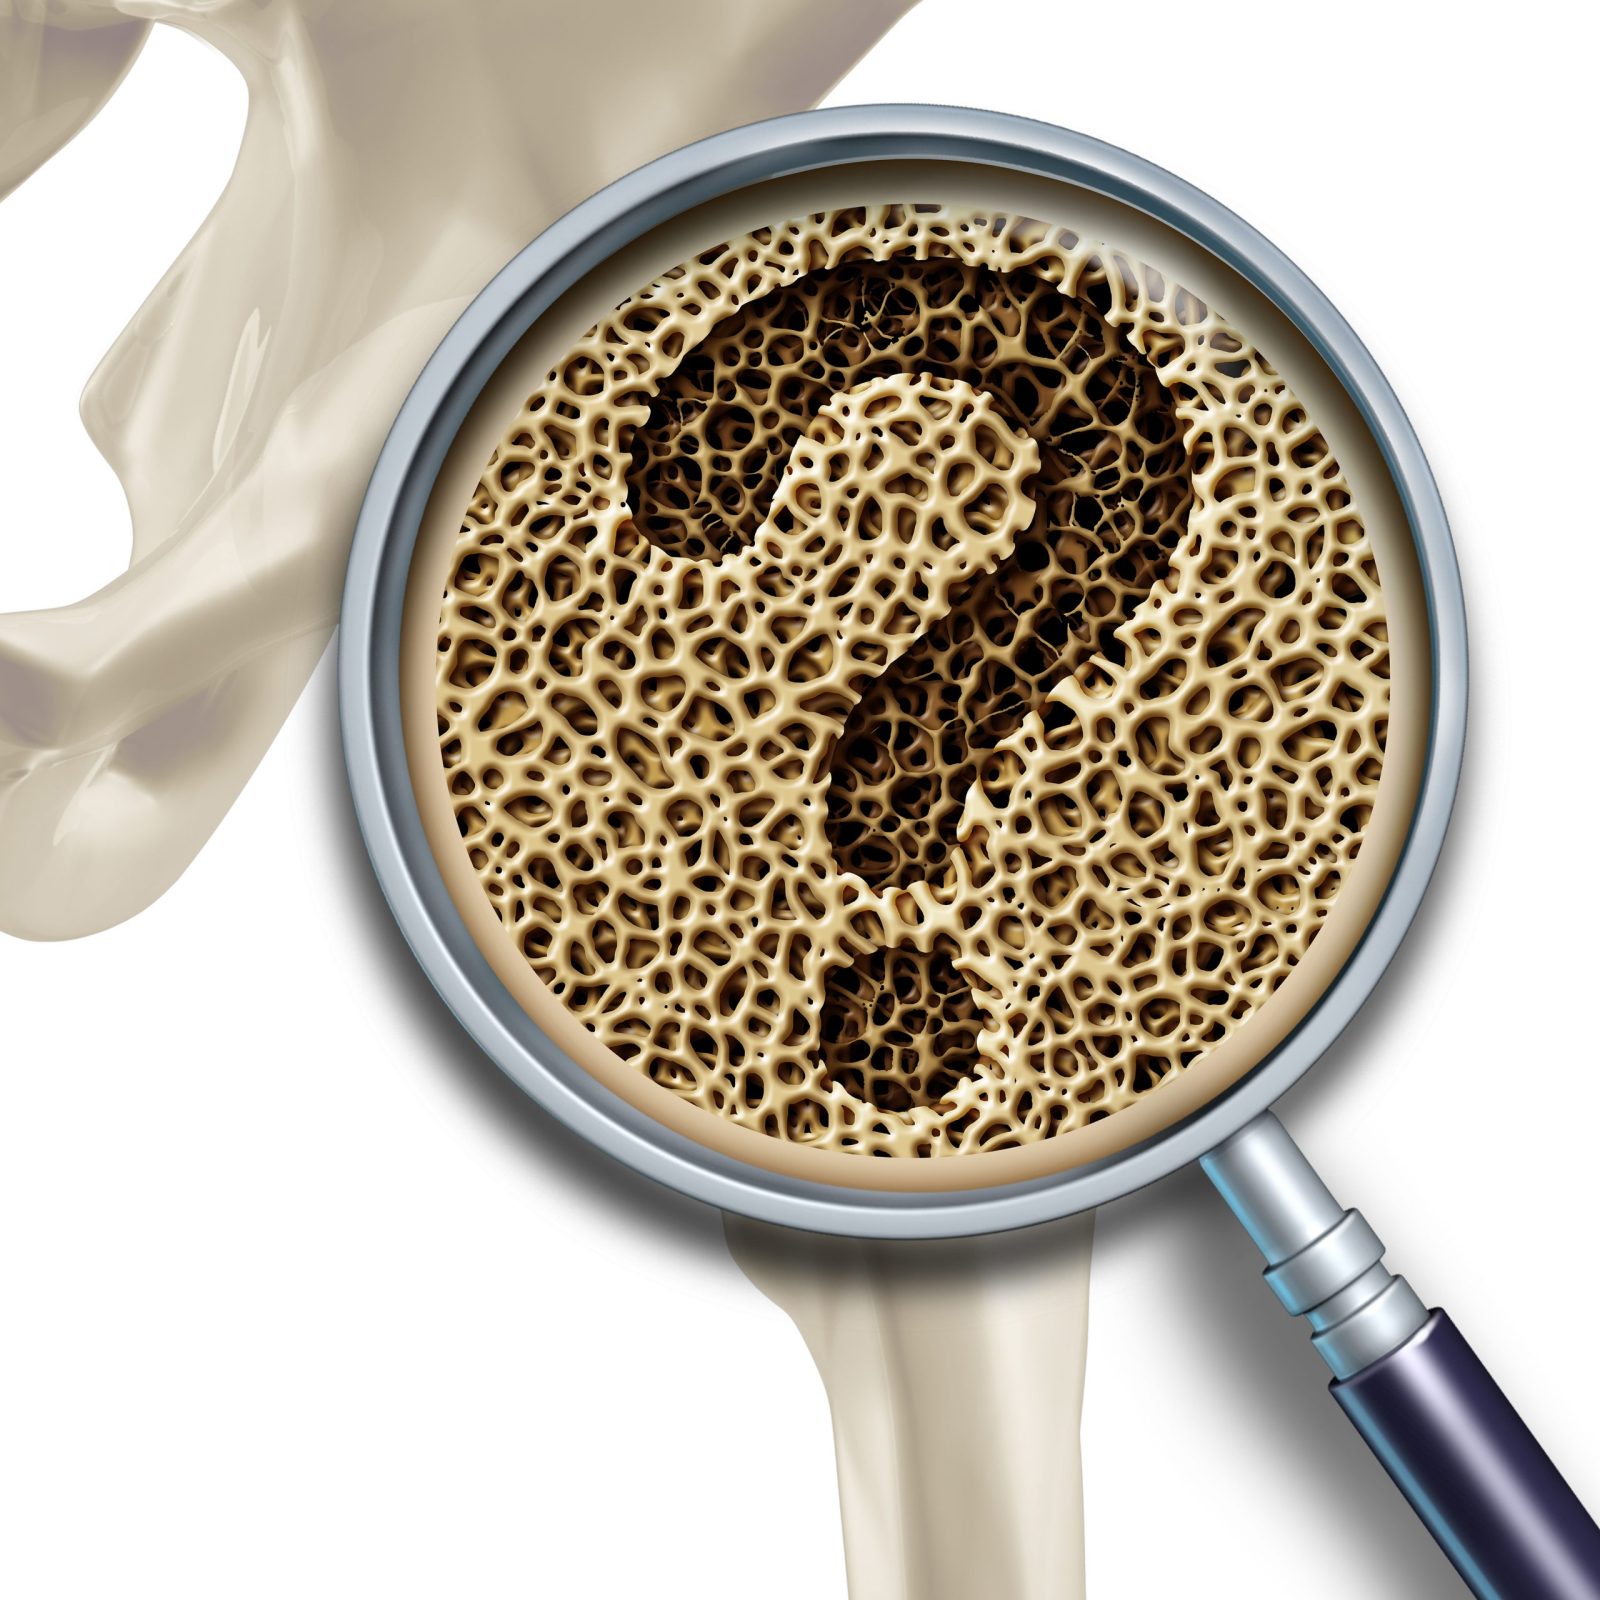 Bone medical health questions and osteoporosis illustration concept as a close up diagram of the inside of human skeletal hip bones with a magnification glass showing a normal healthy condition degrading to abnormal unhealthy anatomy as a question mark.